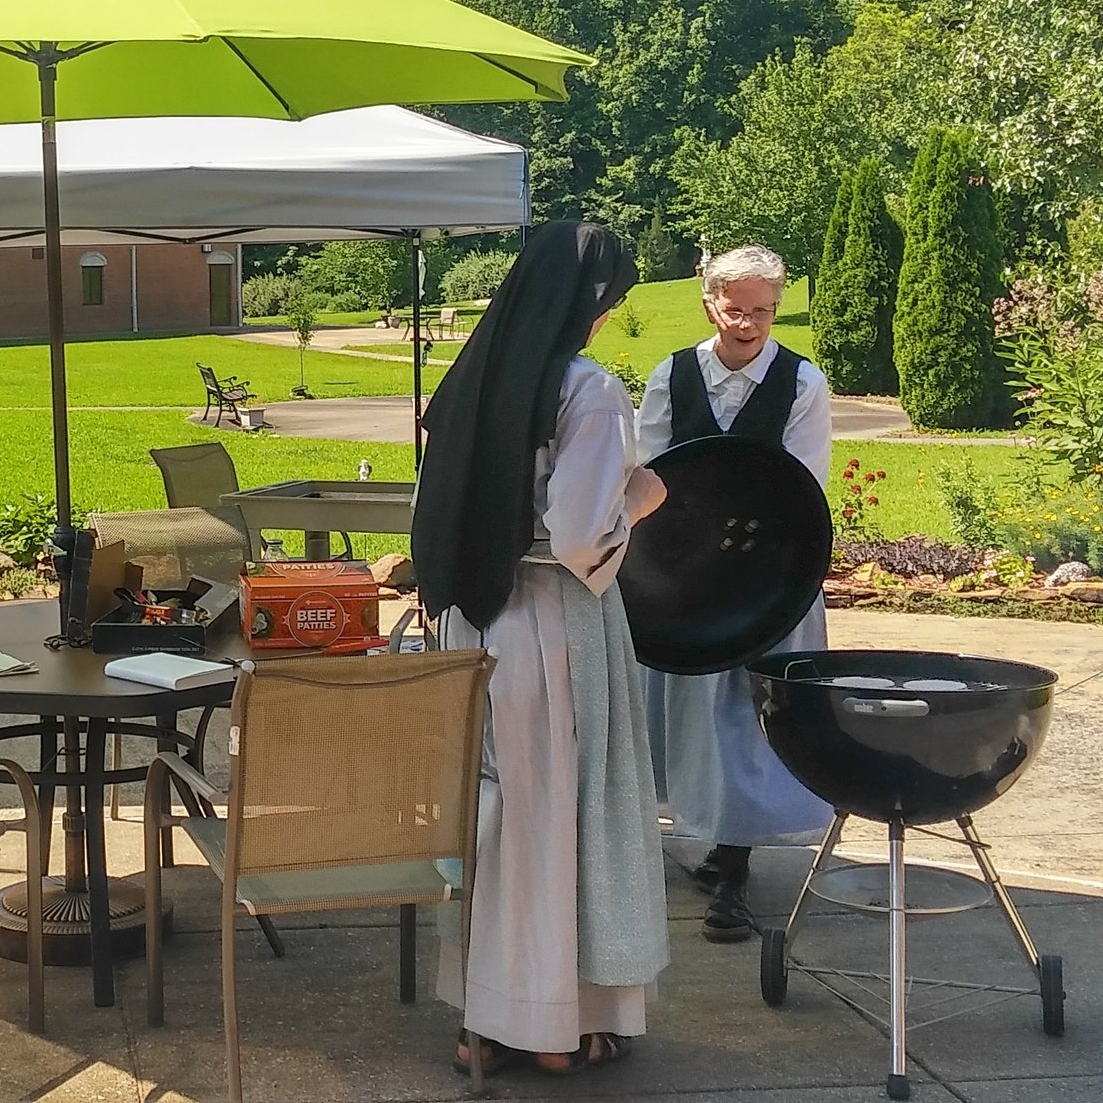  Christie giving Sr. Lucia Marie expert pointers on grilling hamburgers. 